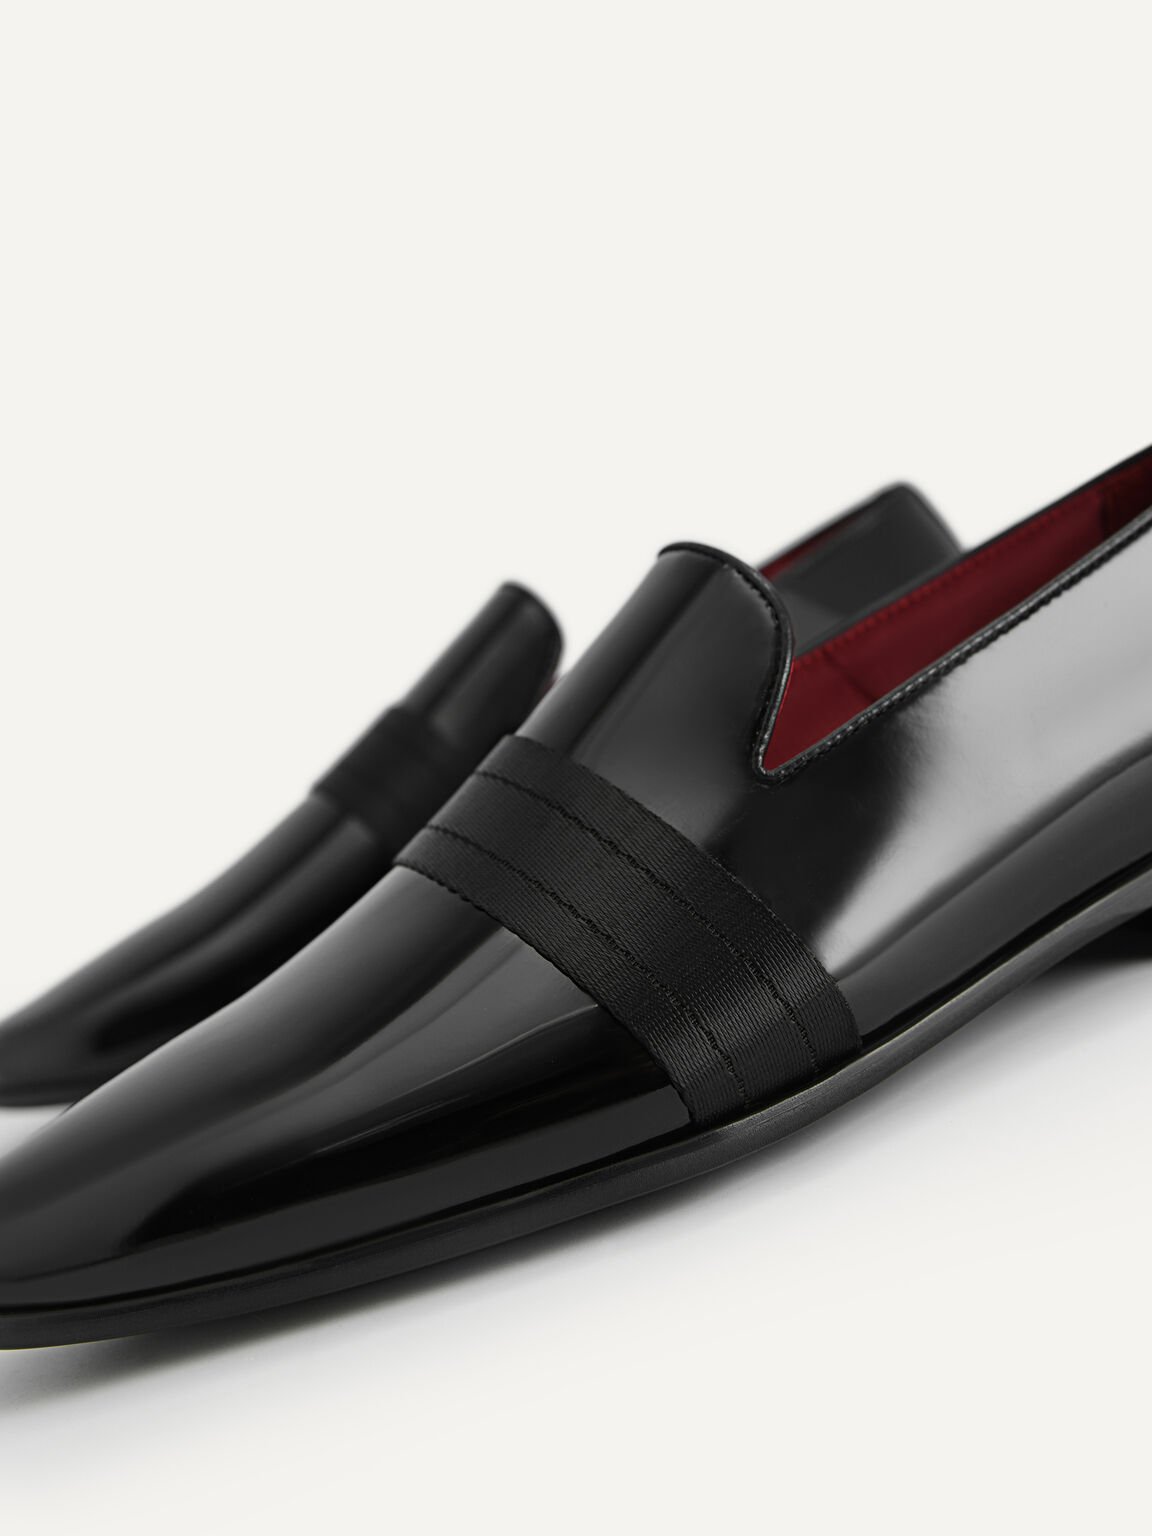 Patent Leather Loafers, Black